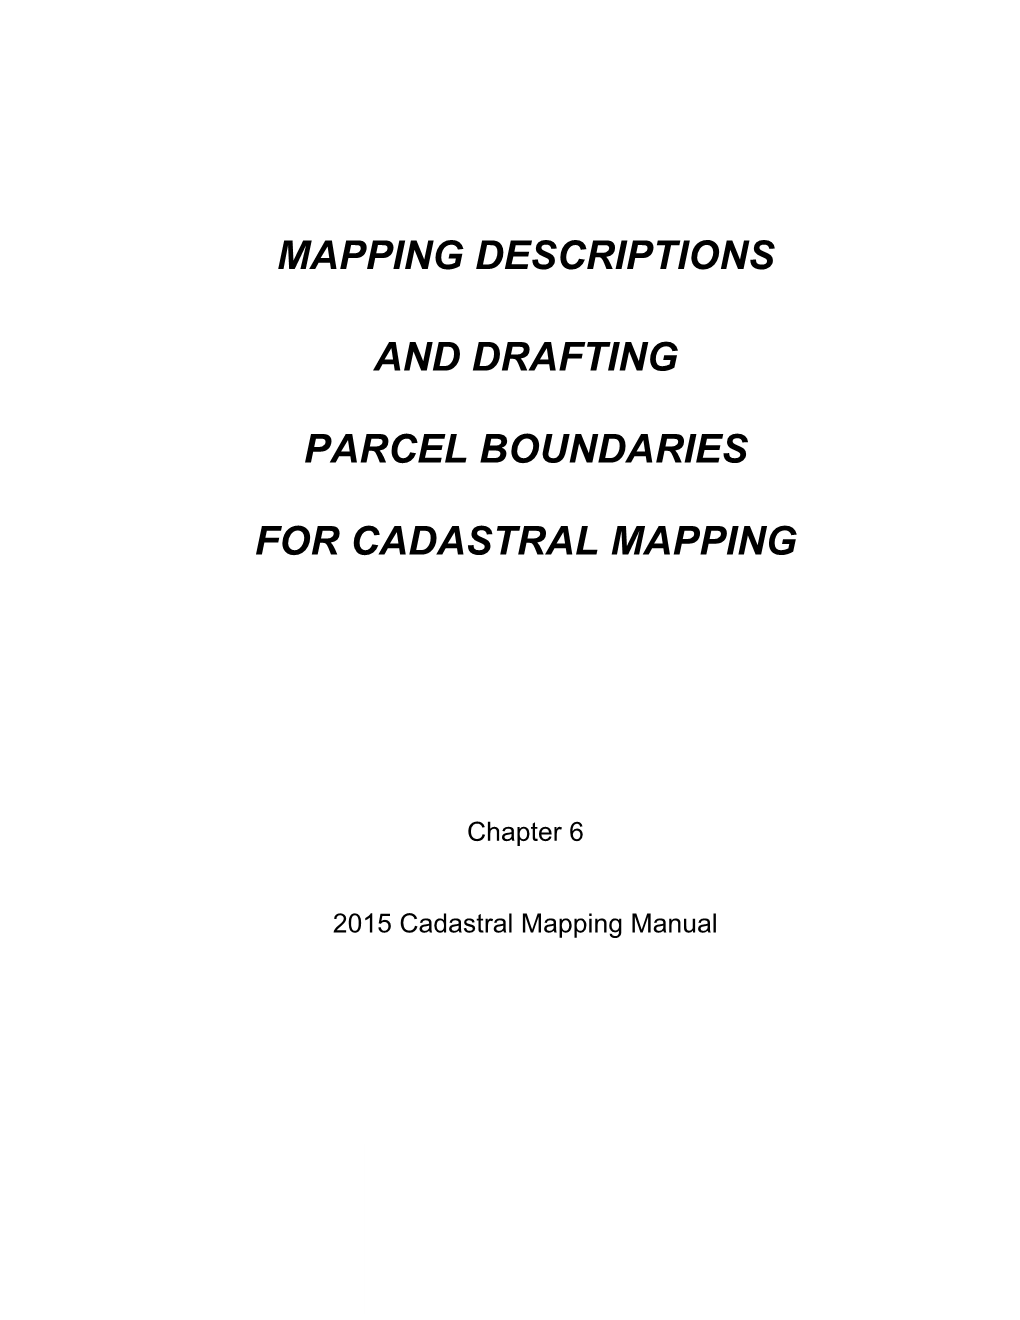 Mapping Descriptions and Drafting Parcel Boundaries for Cadastral